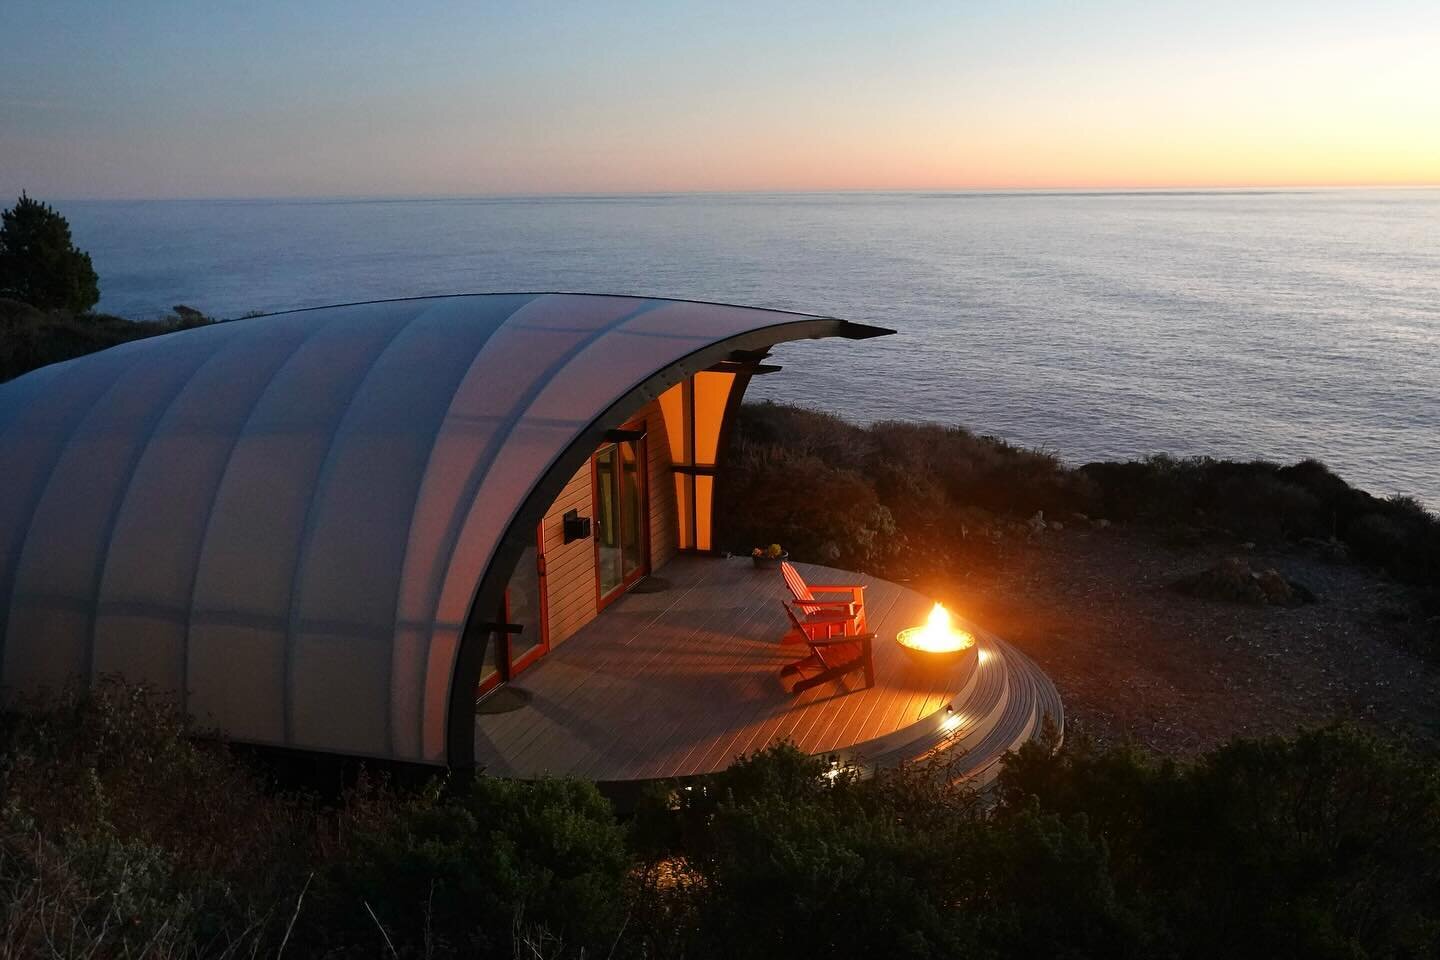 Glowing inside and out&hellip; the Autonomous Tent at Treebones Resort
.
.
.
.
.
#autonomoustent #treebonesresort #bigsur #california #sunset #campfire #oceanview #glamping #luxurytravel #oceanlover #travel #sunsetlovers #sunsetphotography #architect